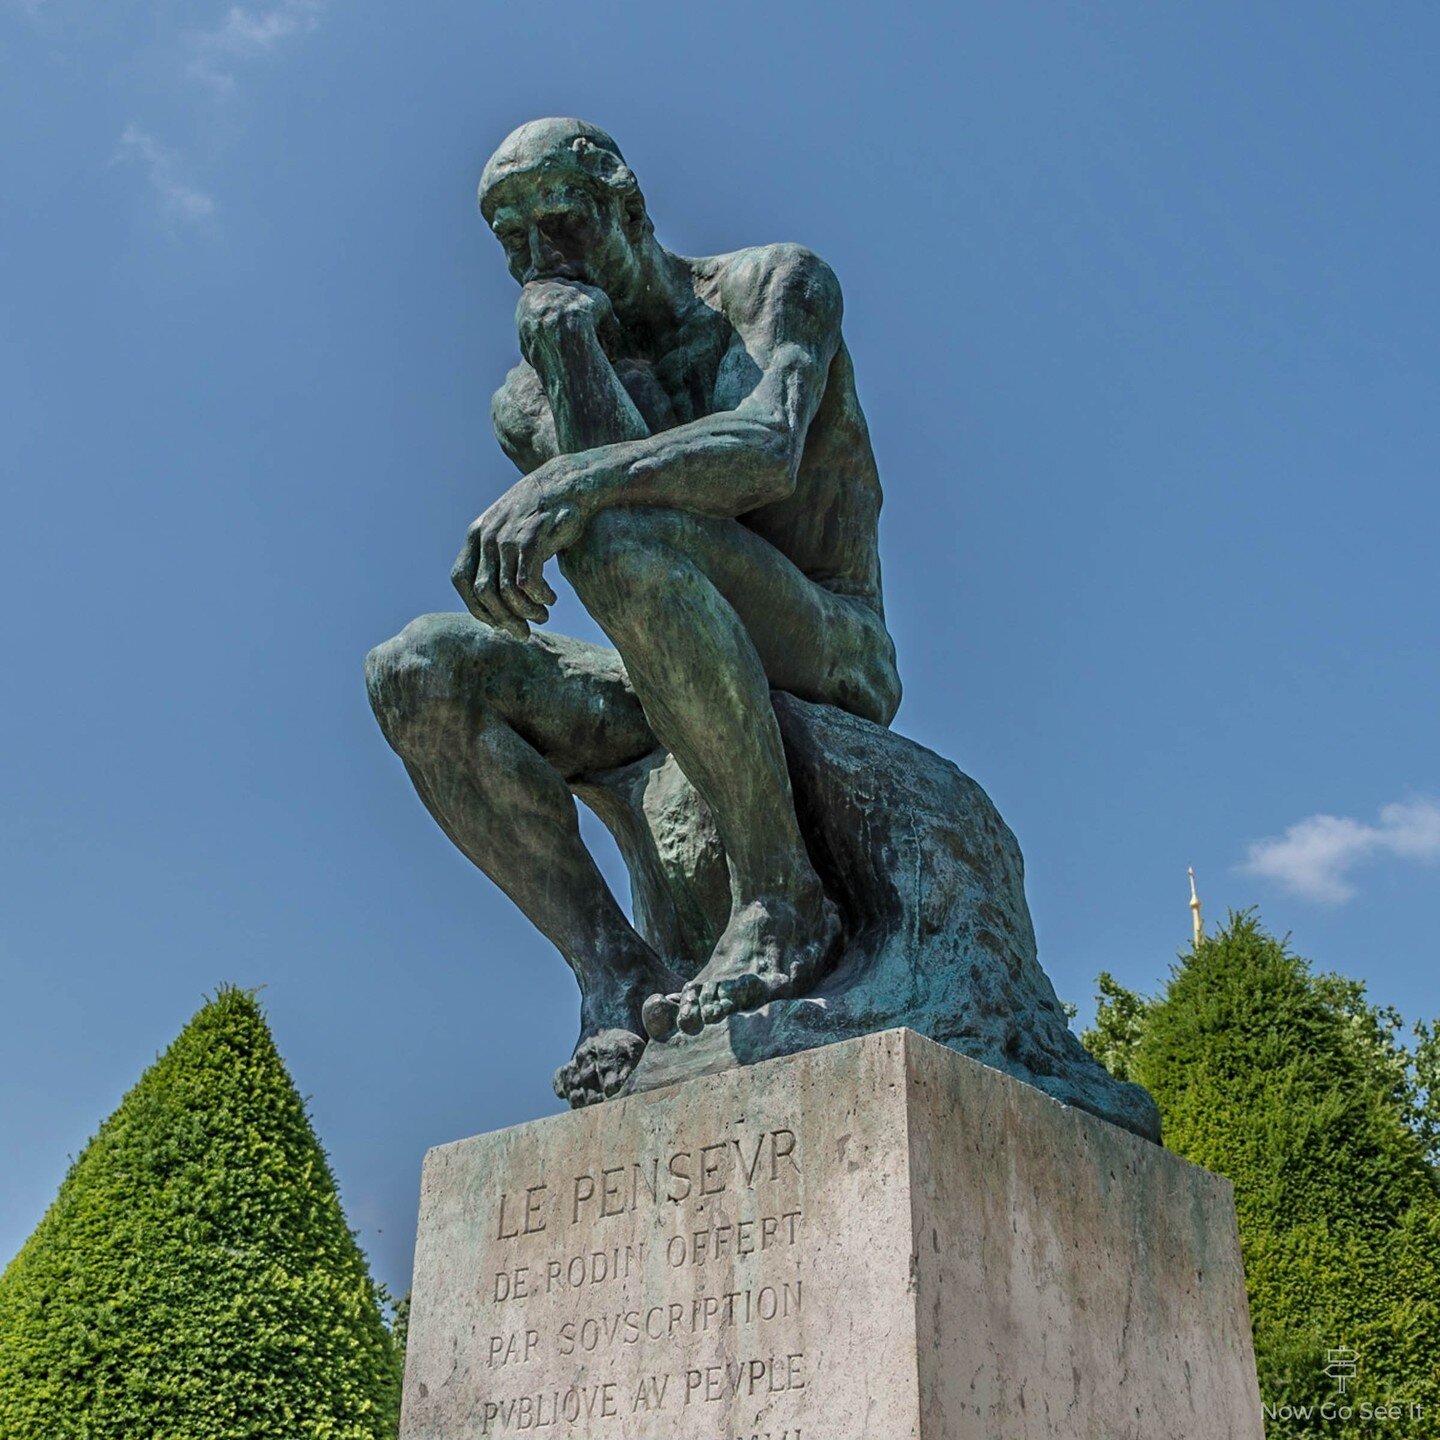 ⁠
The Thinker, one of Rodin's most famous works is on display in the gardens at the Rodin Museum in Paris.  This Week on the blog we lay out a 4-day packed Itinerary to help you plan a trip to Paris. ⁠
⁠
⁠
⁠
⁠
#sculpture #art #paris #artist #artwork 